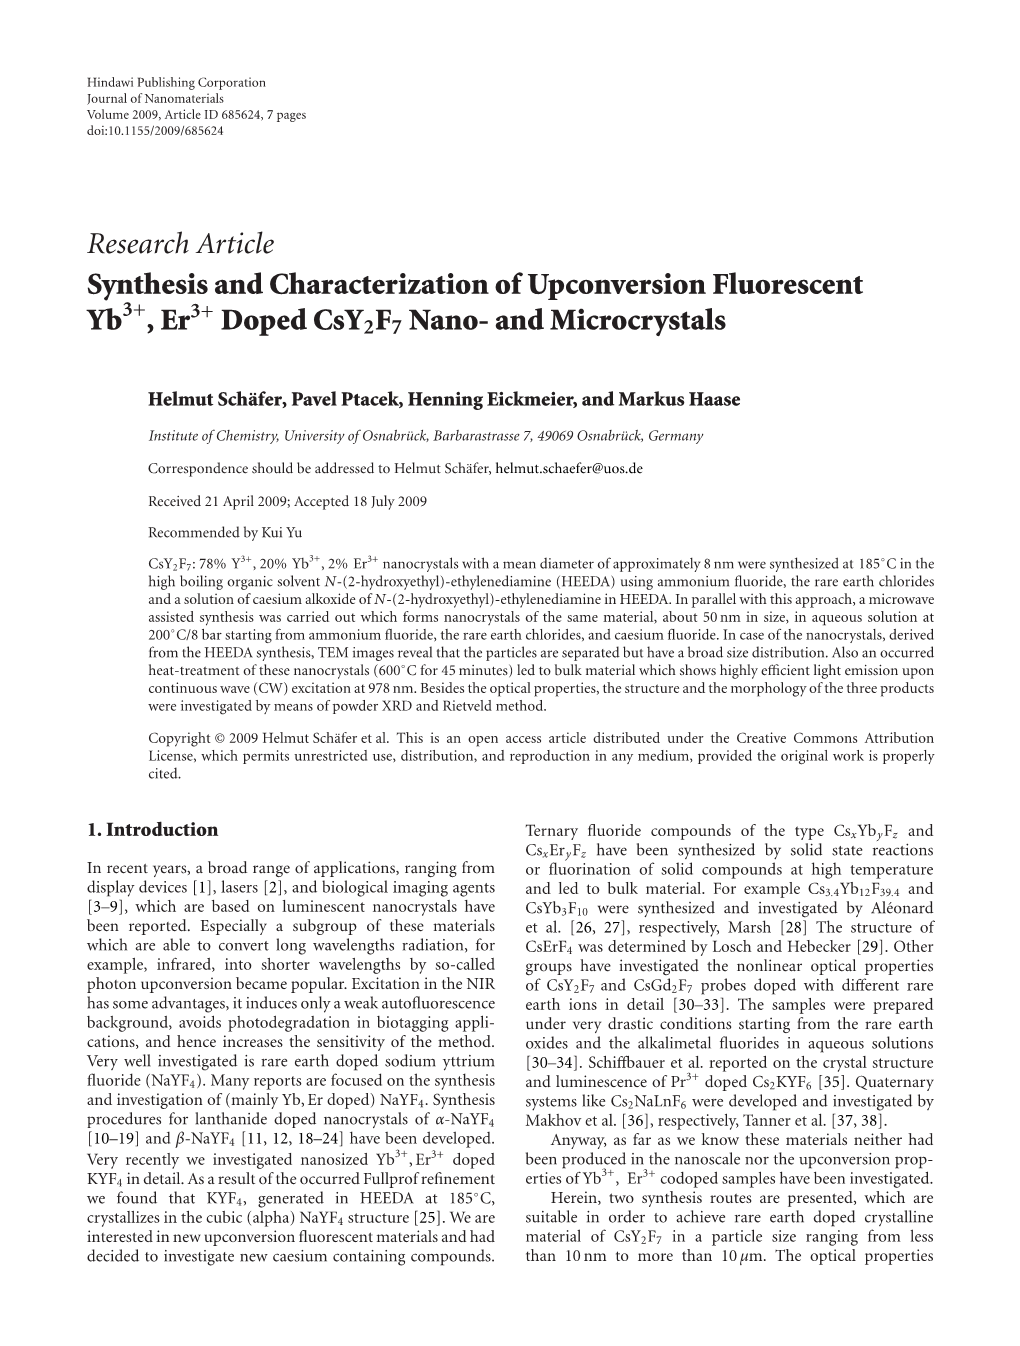 Synthesis and Characterization of Upconversion Fluorescent, Doped